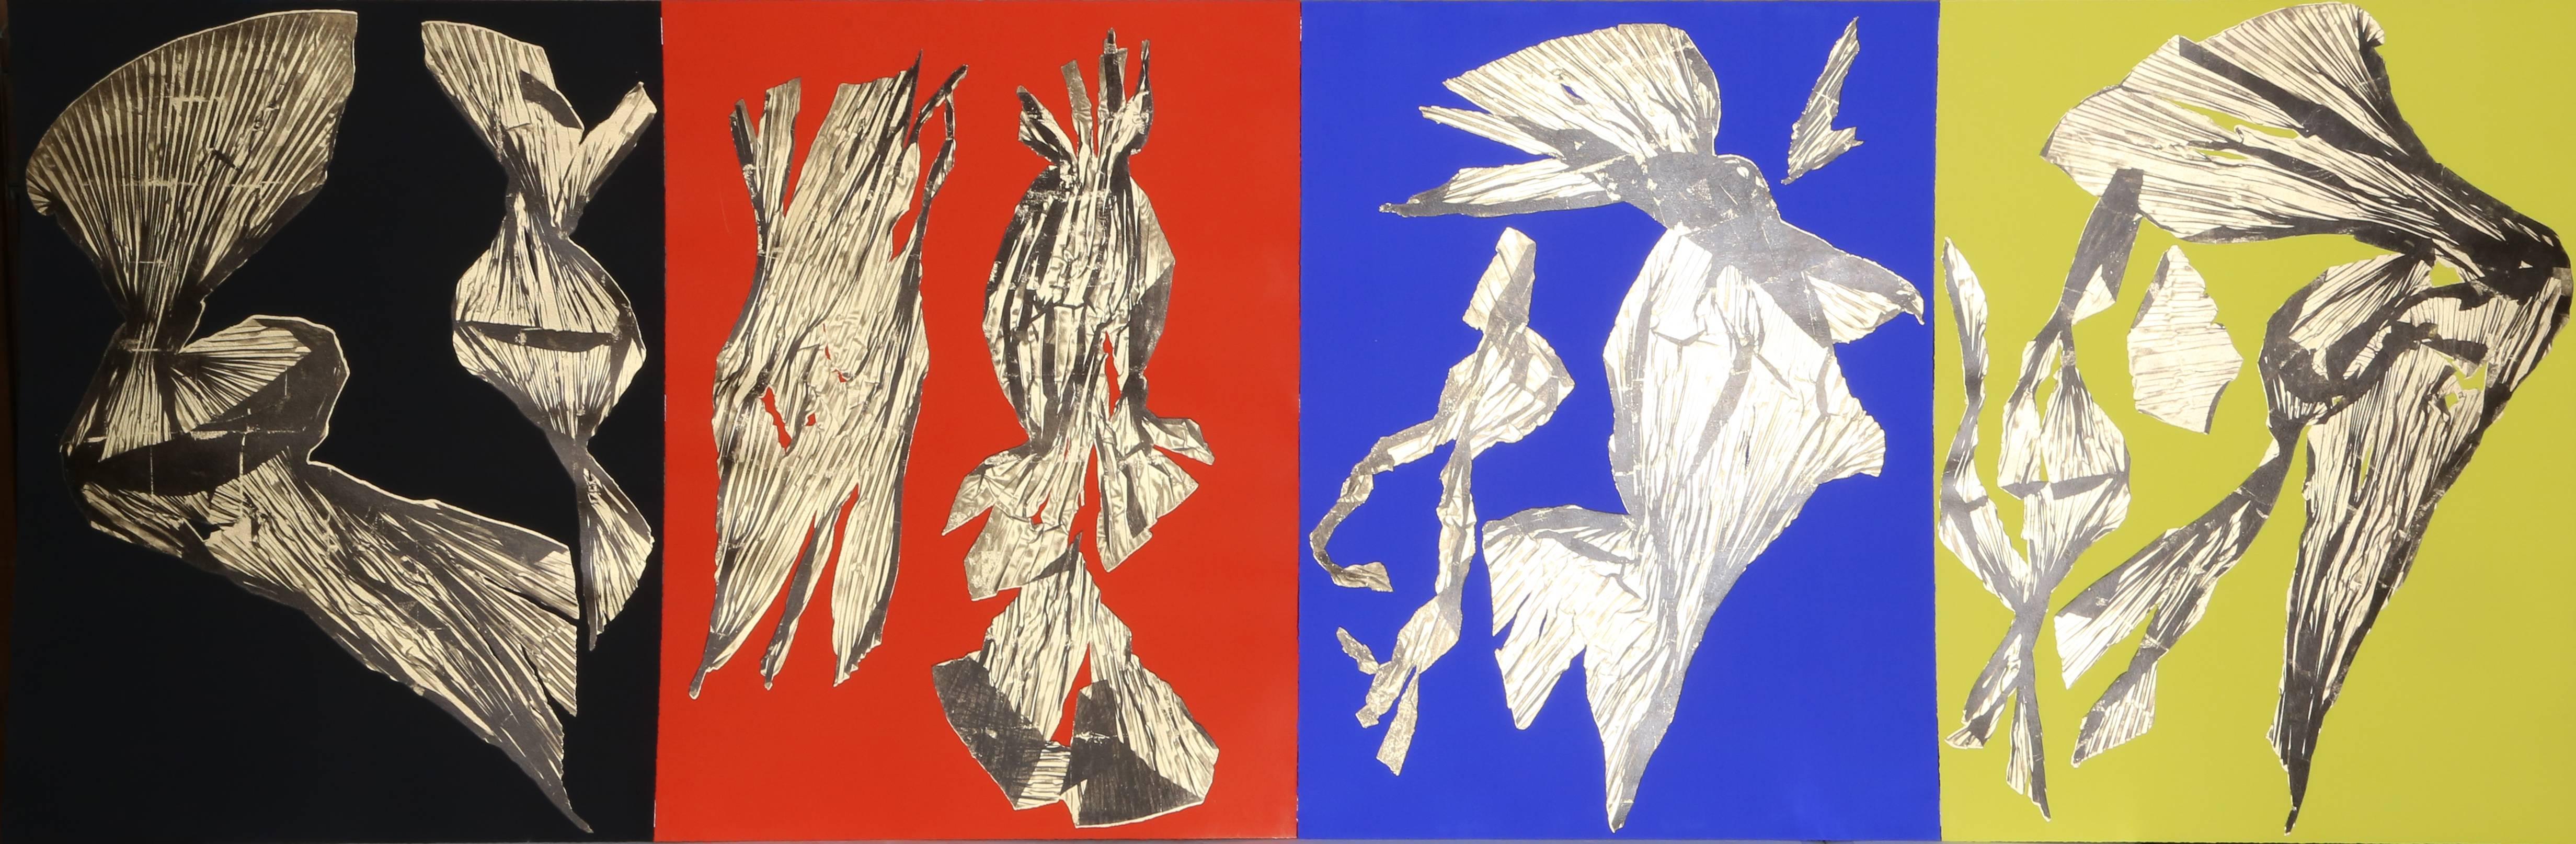 Artist: Lynda Benglis, American (b. 1941)
Title: Dual Nature (Quad)
Year: 1991
Medium: Four Lithographs with Gold Leaf on Hand Tinted Paper, signed and numbered verso
Edition: 25
Image Size: 31 x 24 inches (each sheet)
Size: 31  x 96 in. (78.74  x